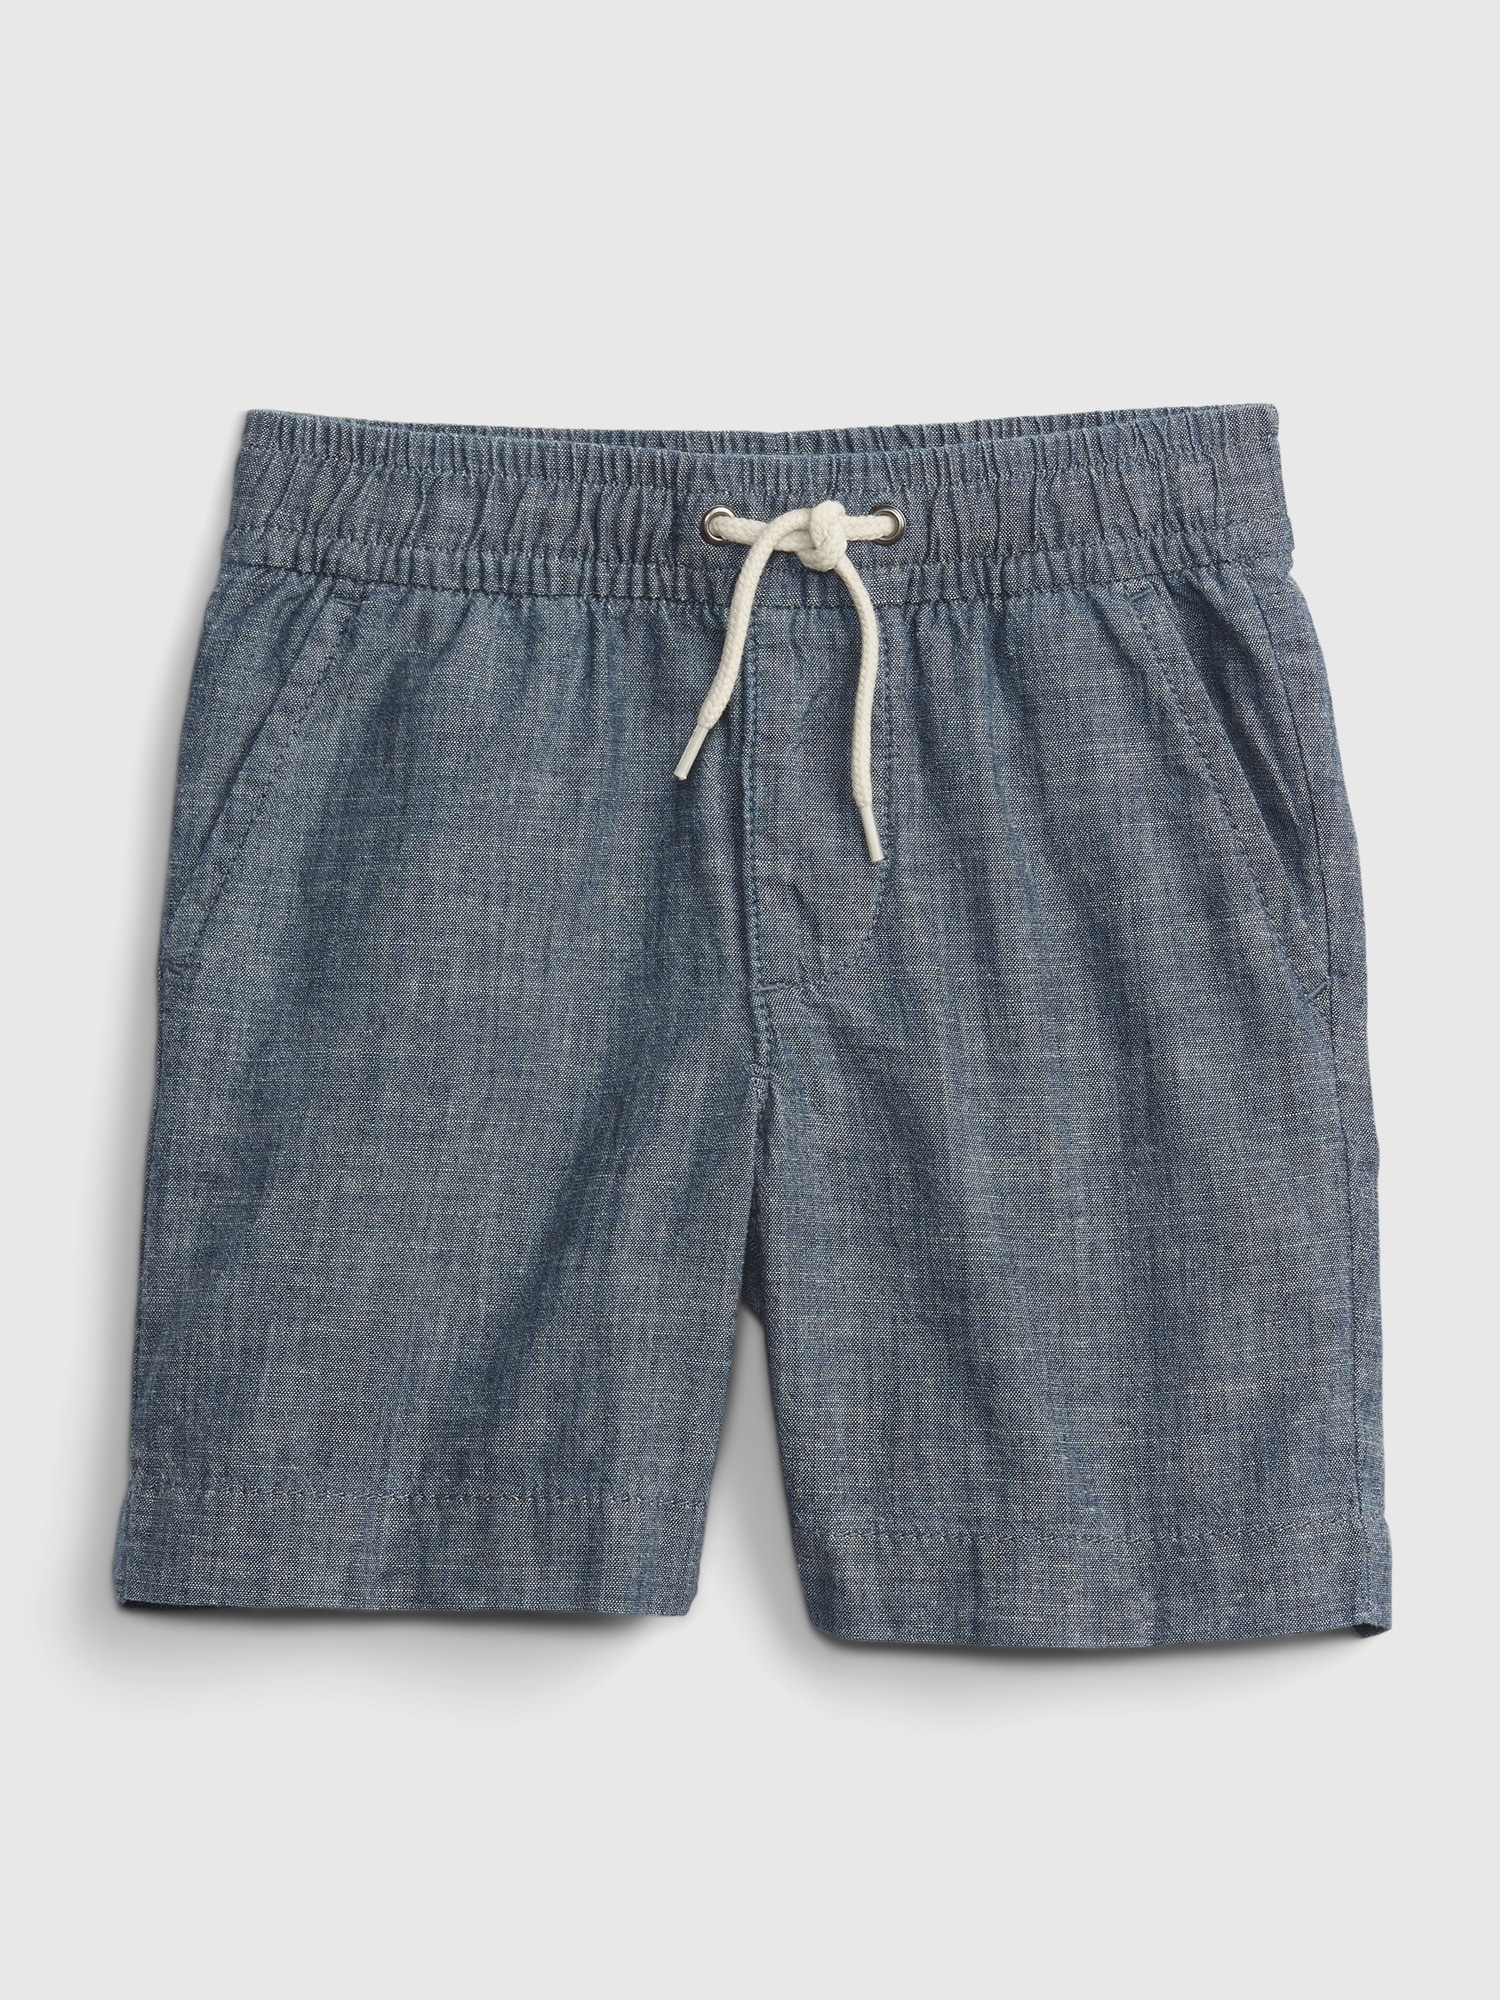 Toddler Chambray Pull-On Shorts with Washwell™ | Gap